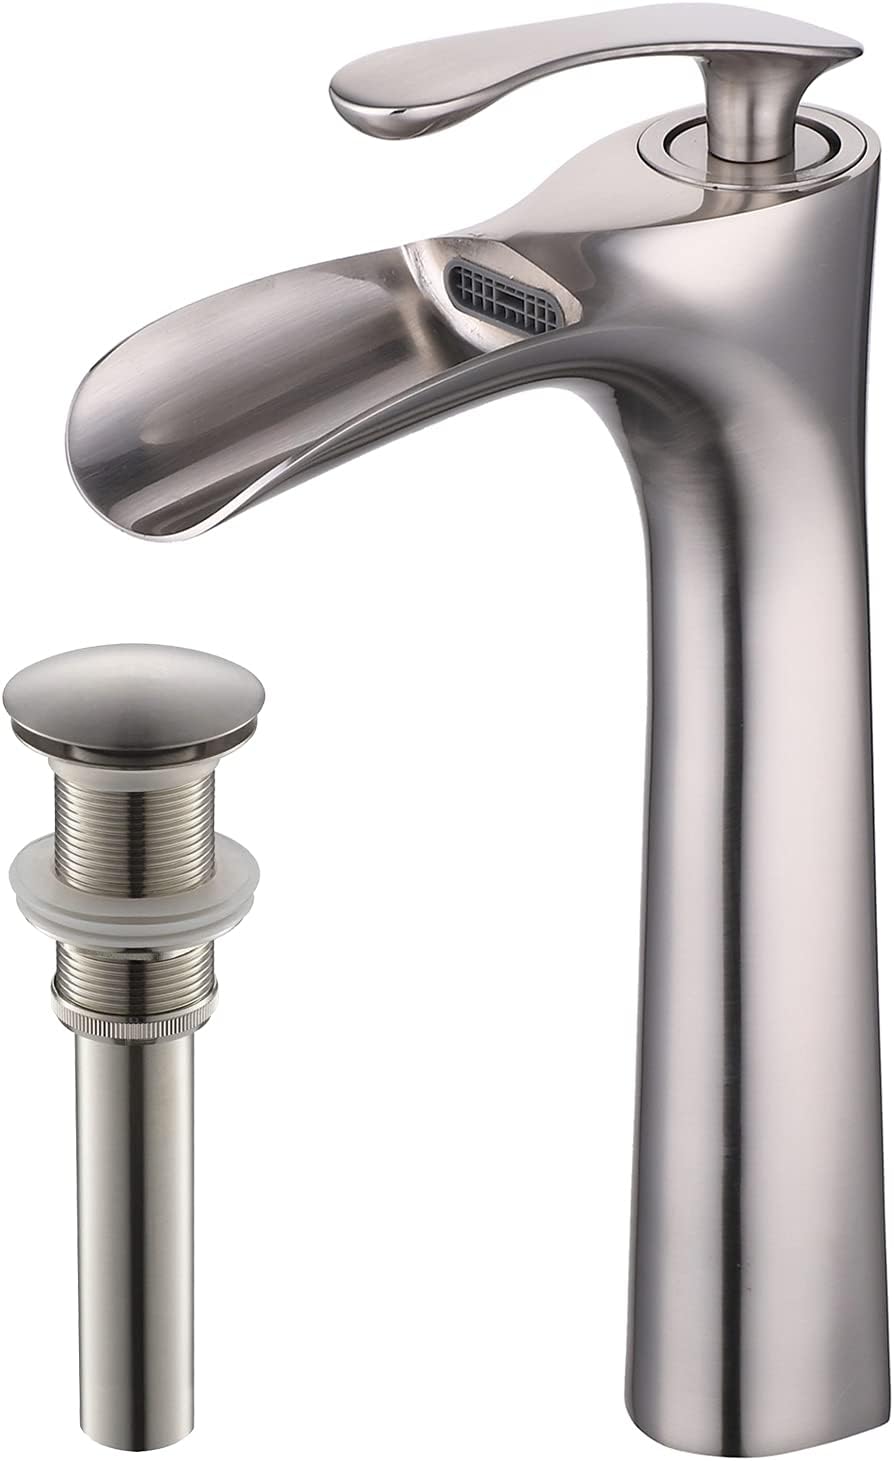 8" Brushed Nickel Bathroom Sink Faucet Waterfall Lavatory One Hole/Handle Taps